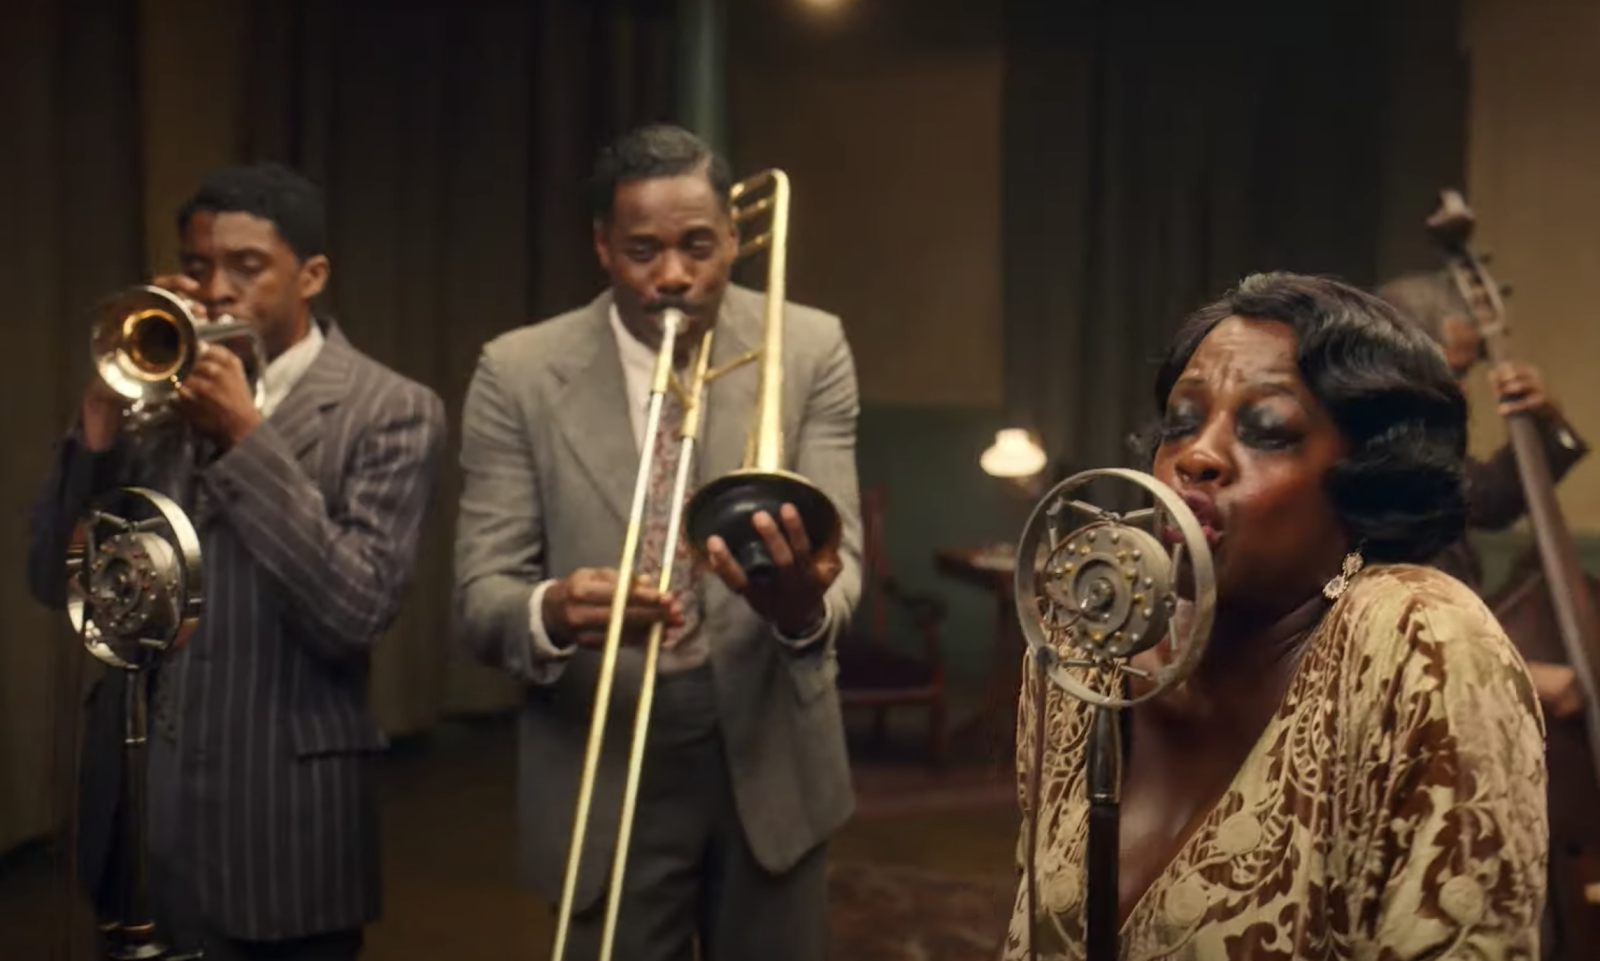 This is a screen still from Ma Raineys Black Bottom. Viola Davis is singing into a microphone while in the background, two men play brass instruments.